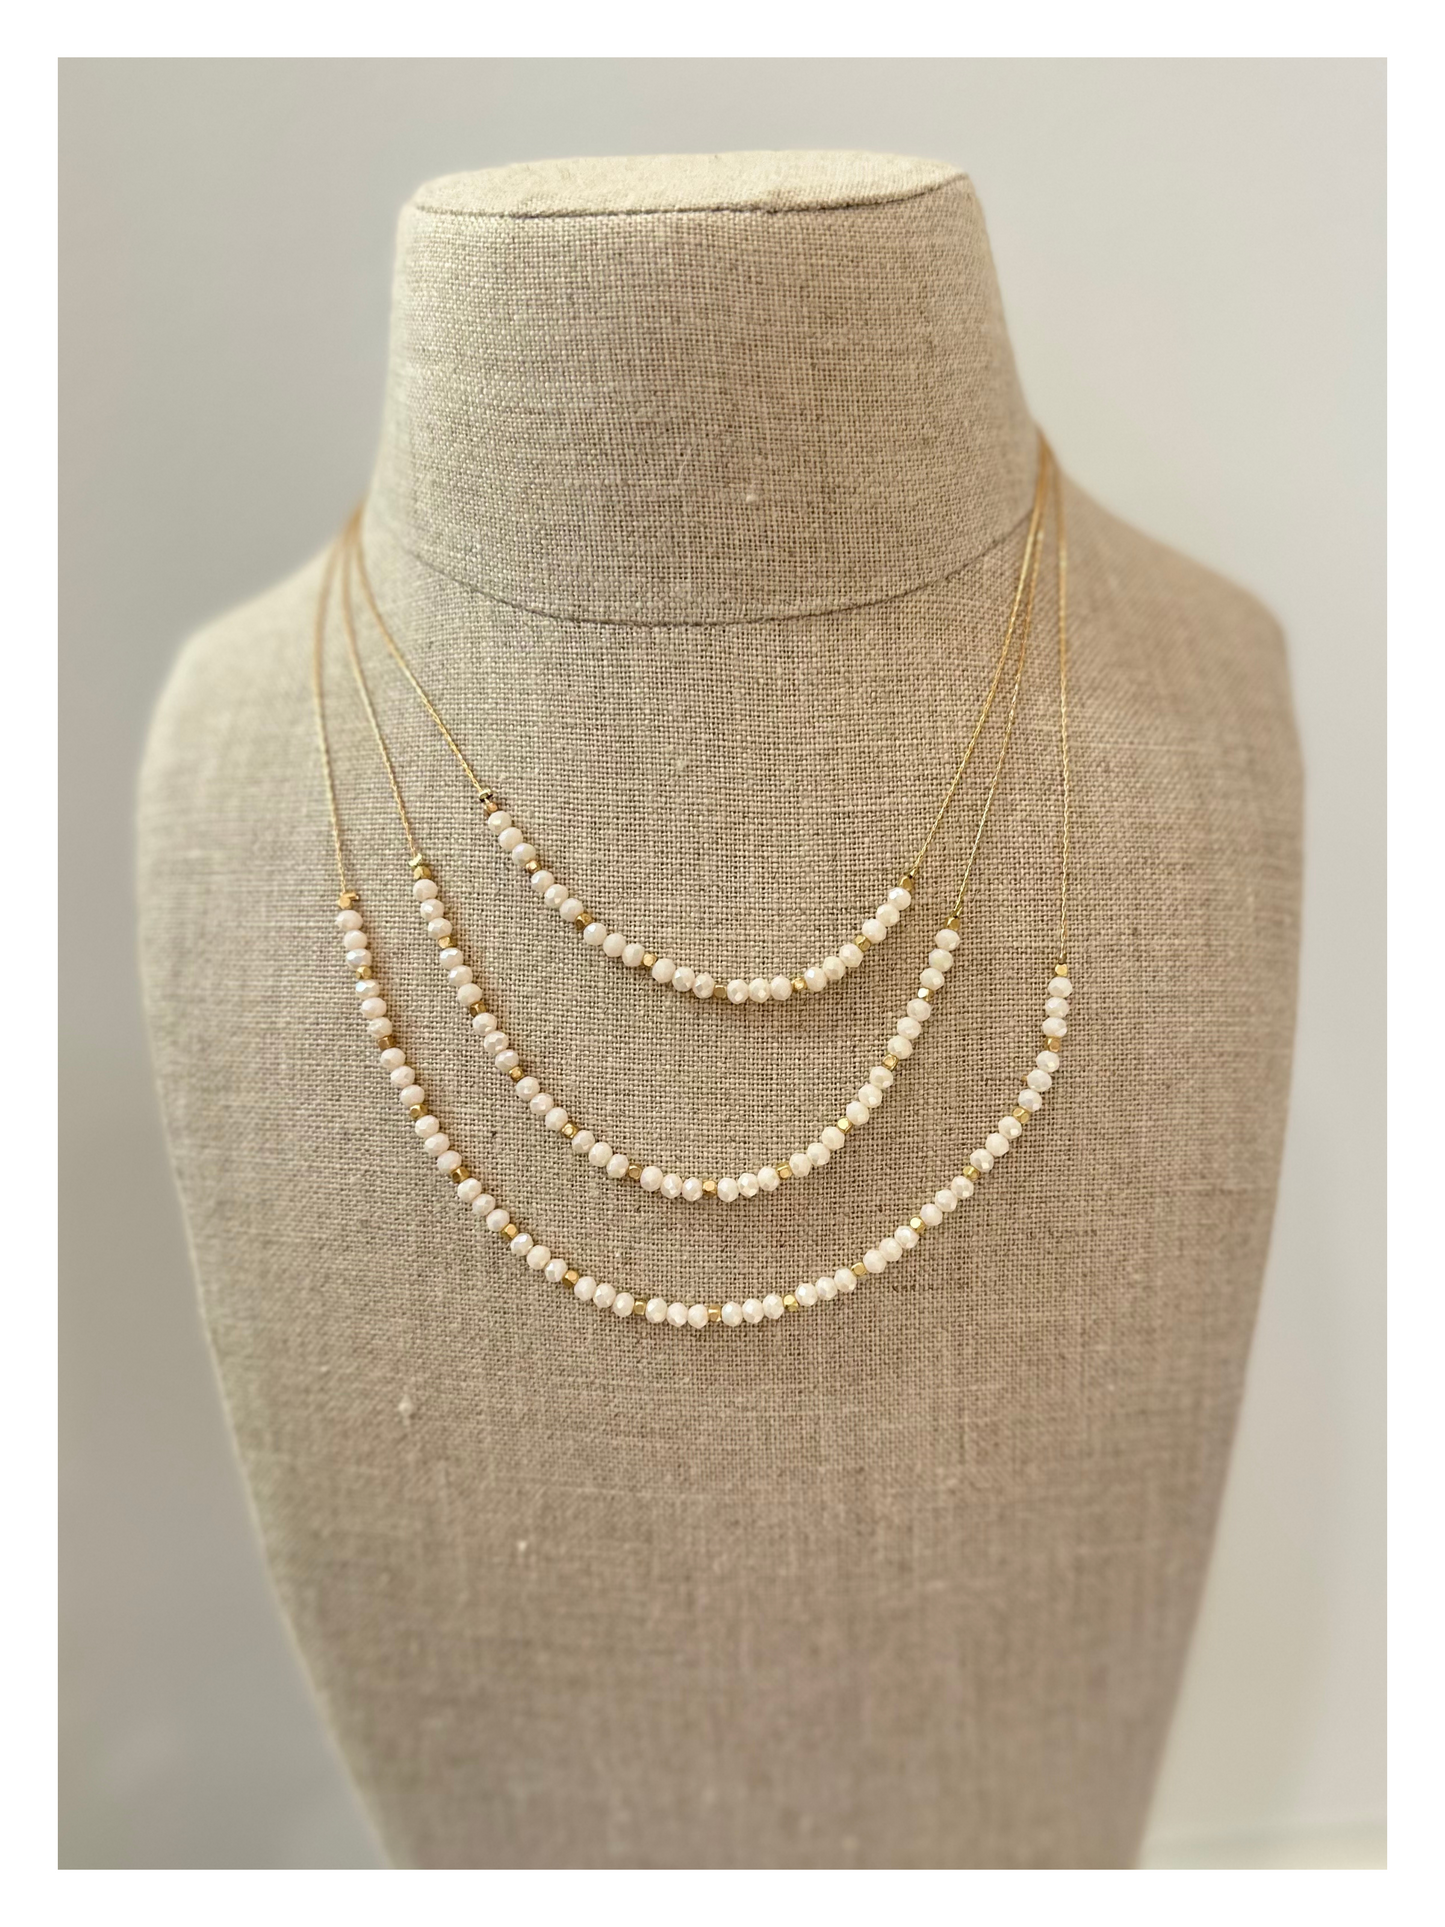 Spring Layer Necklace - White